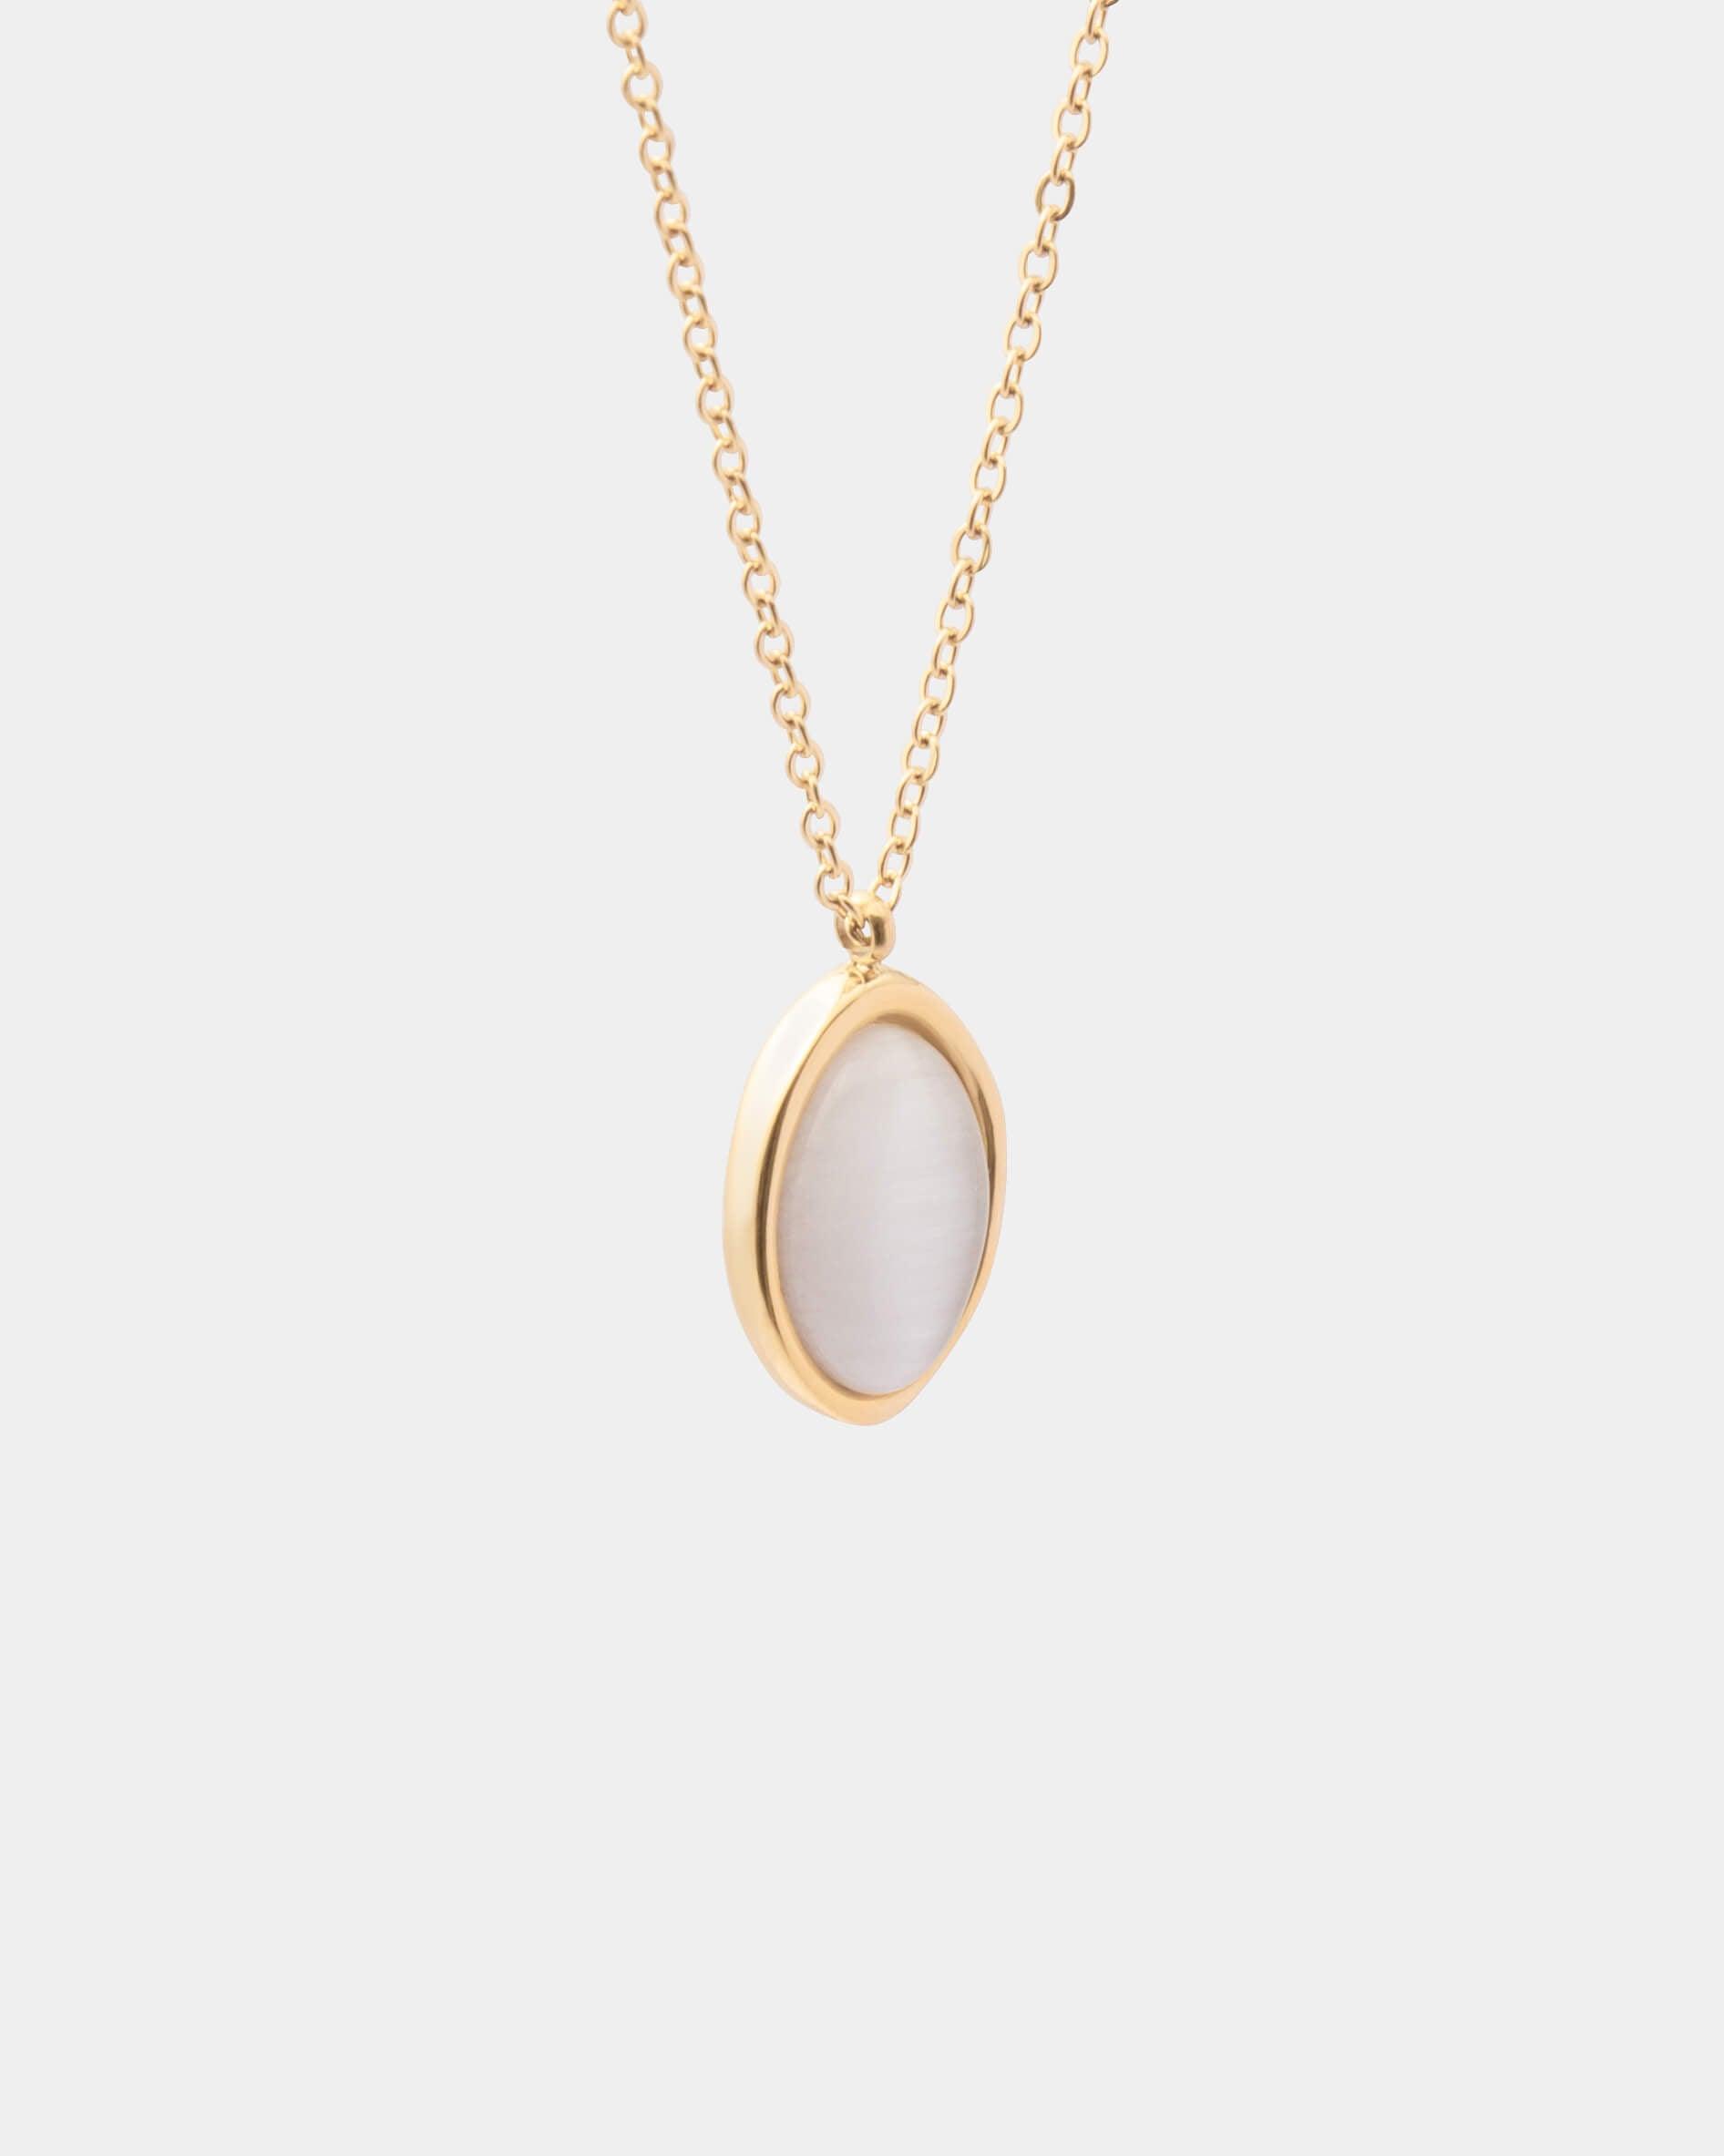 OVAL STONE NECLACE